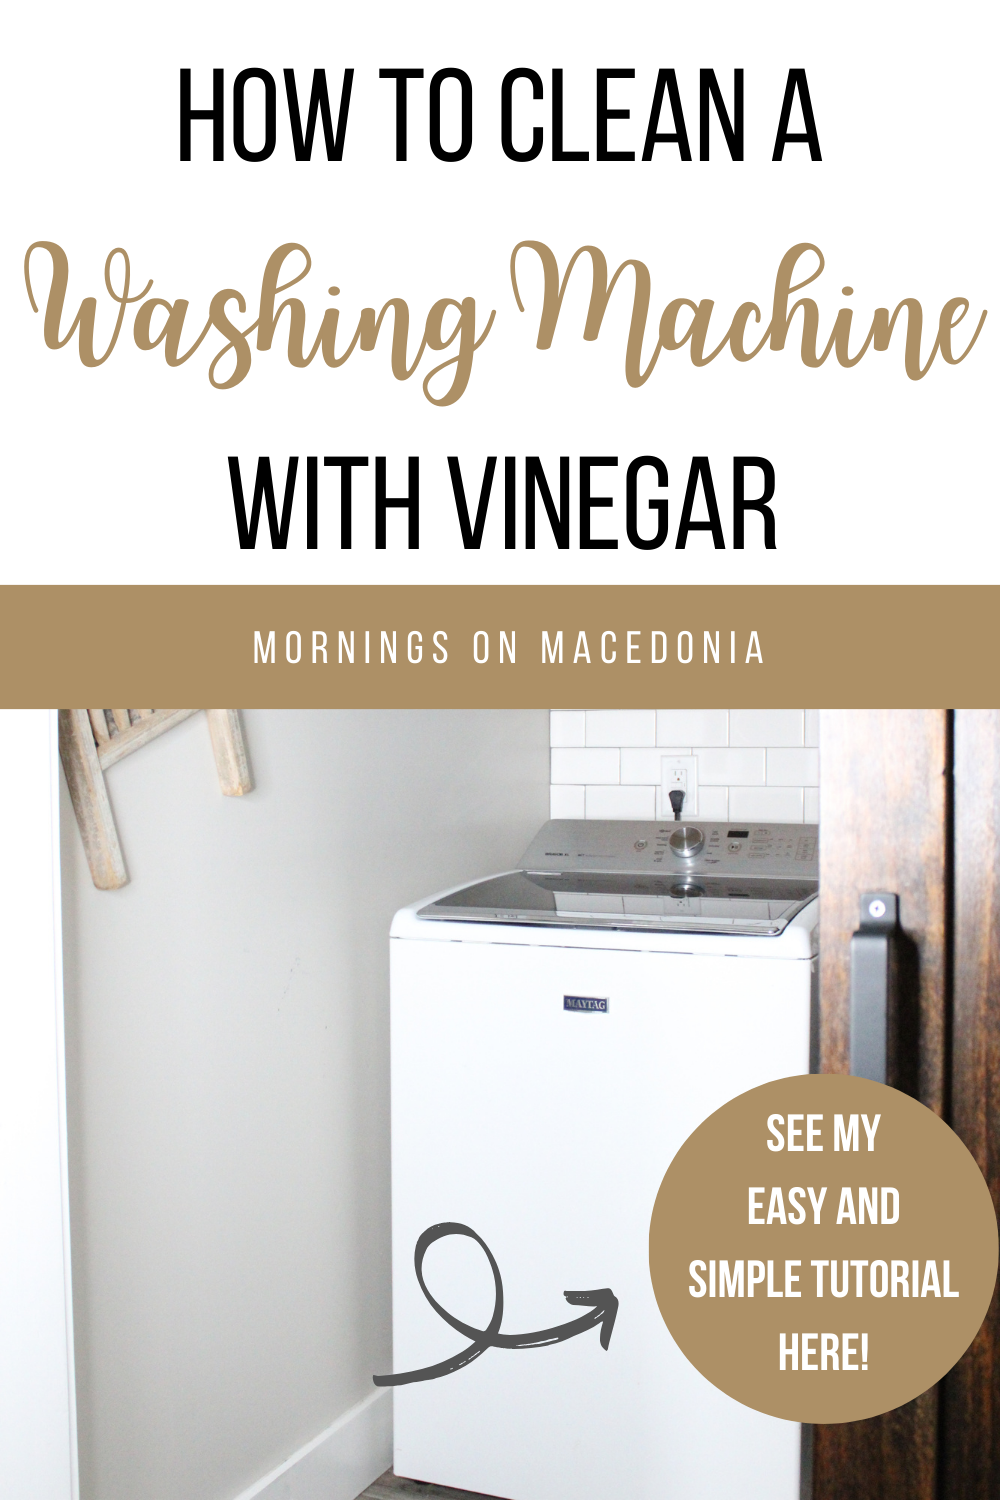 How to Easily Clean a Washing Machine With Vinegar